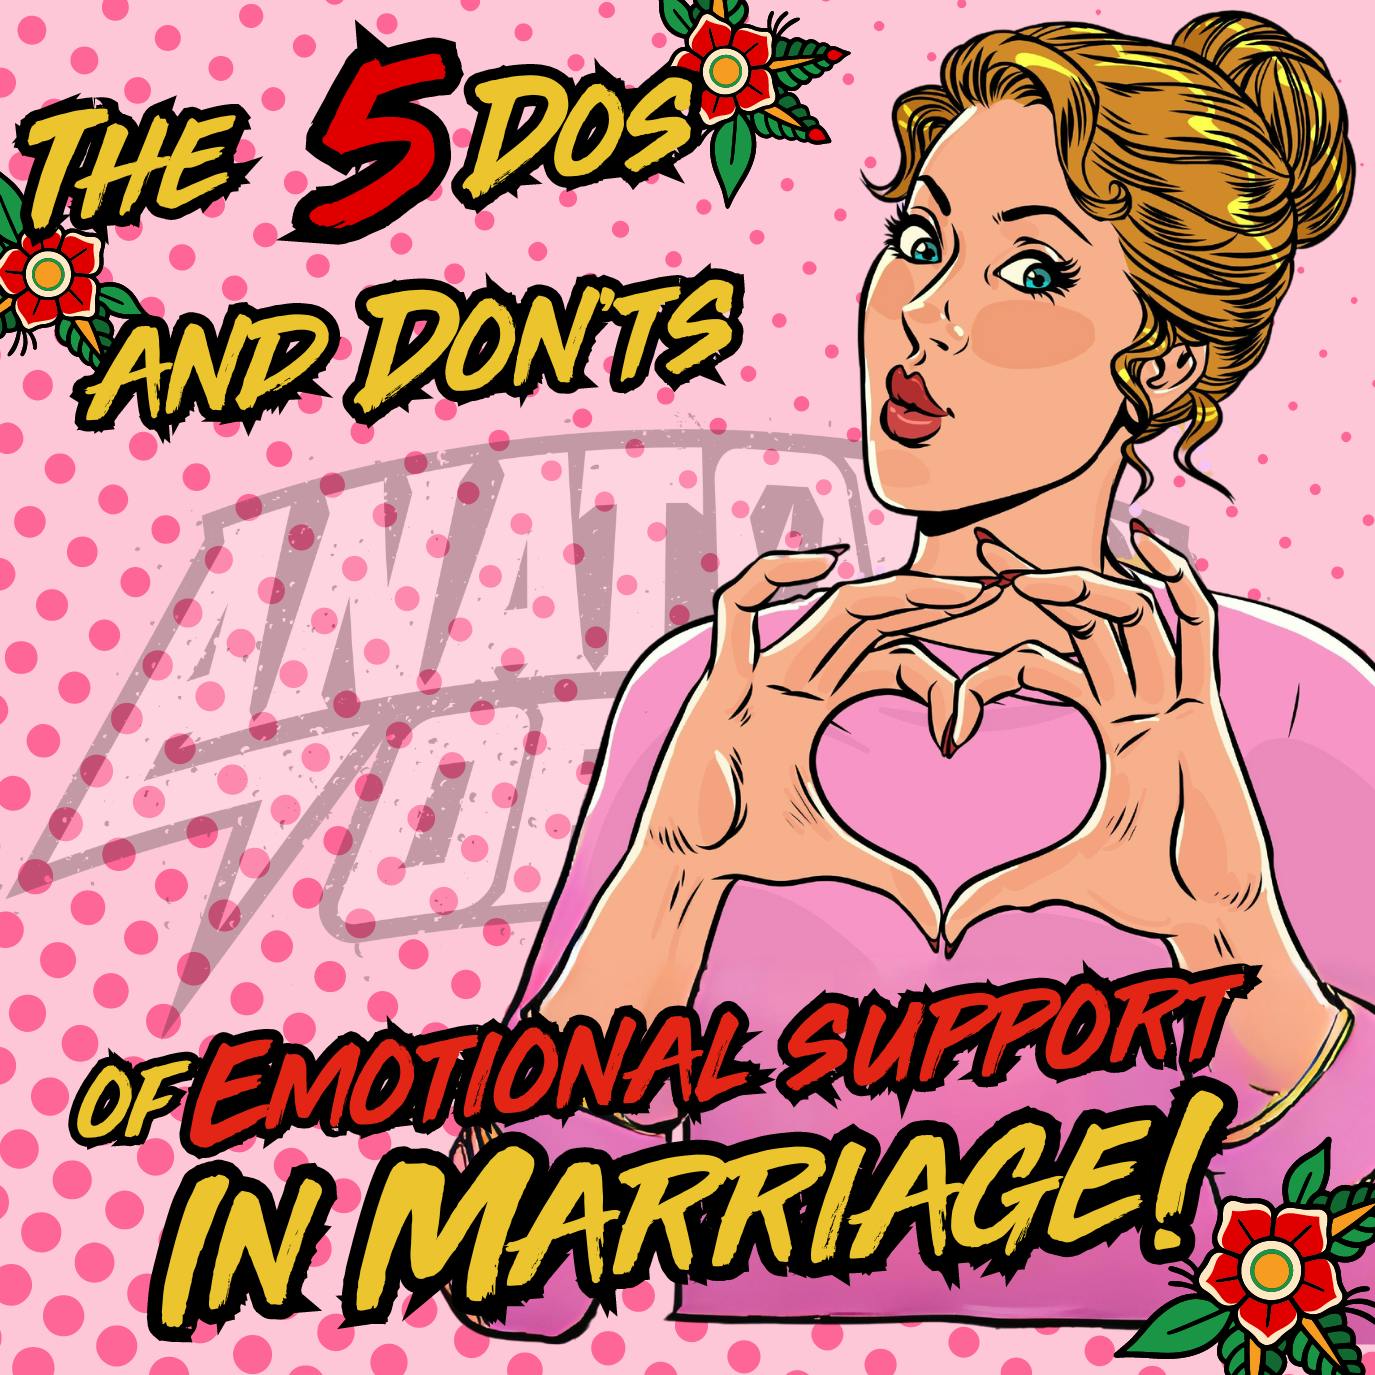 The Five Dos and Don'ts of Emotional Support in Marriage